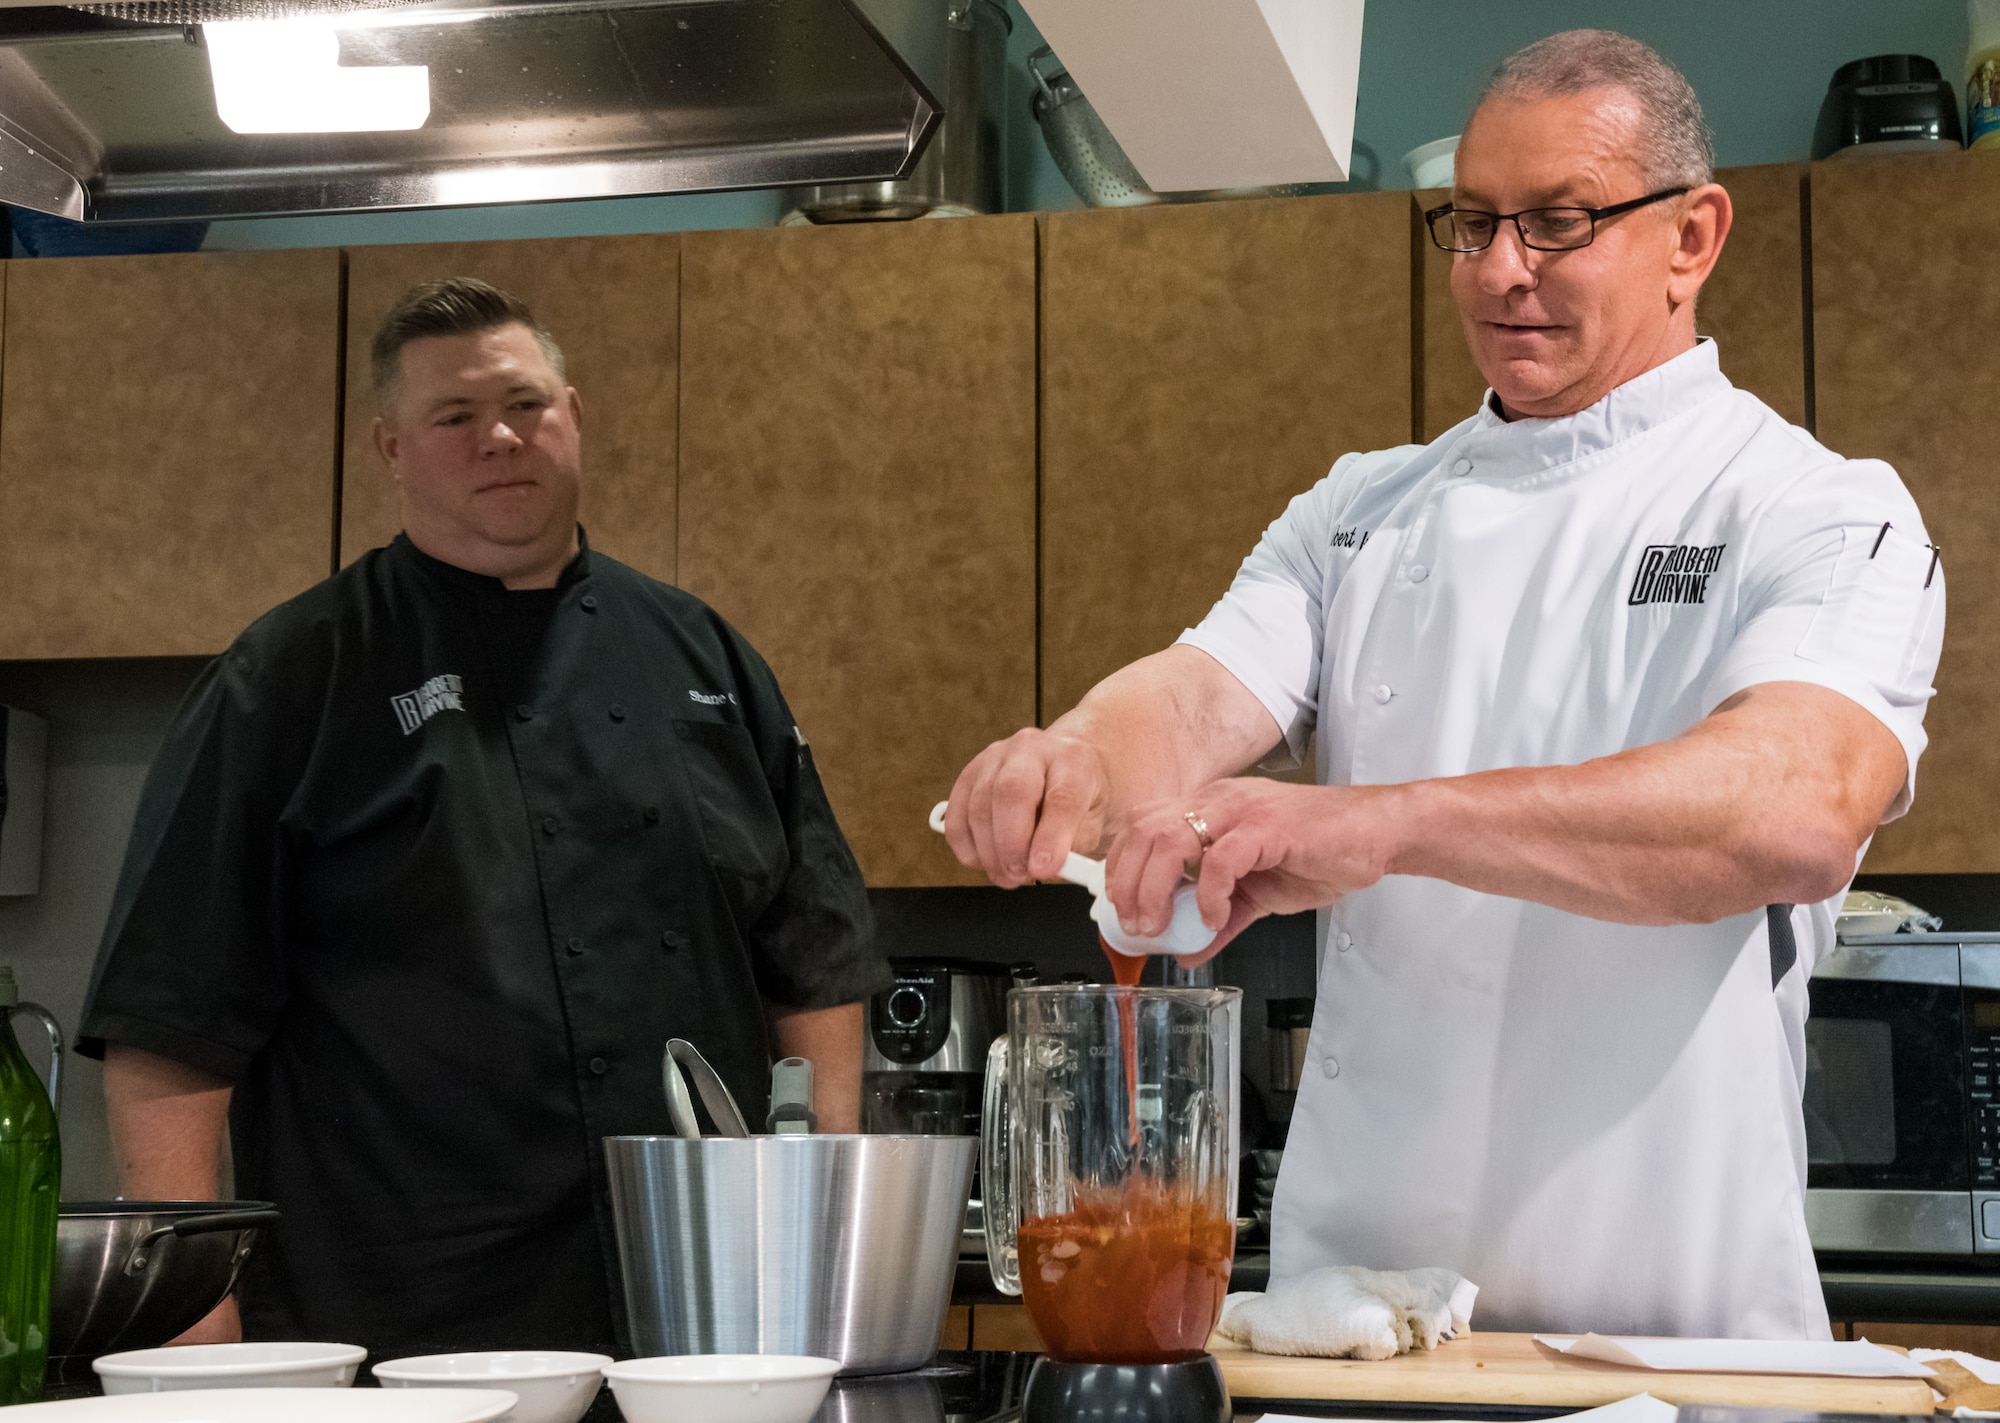 Shane Cash (left), corporate chef for chef Robert Irvine, watches Irvine make a sauce during Dorm to Gourm, Aug. 27, 2019, at Dover Air Force Base, Del. Irvine taught Team Dover members how to make Cuban-Style Stewed Chicken Ropa Vieja Street Tacos and Rad Na Thai Chicken Salad. (U.S. Air Force photo by Roland Balik)